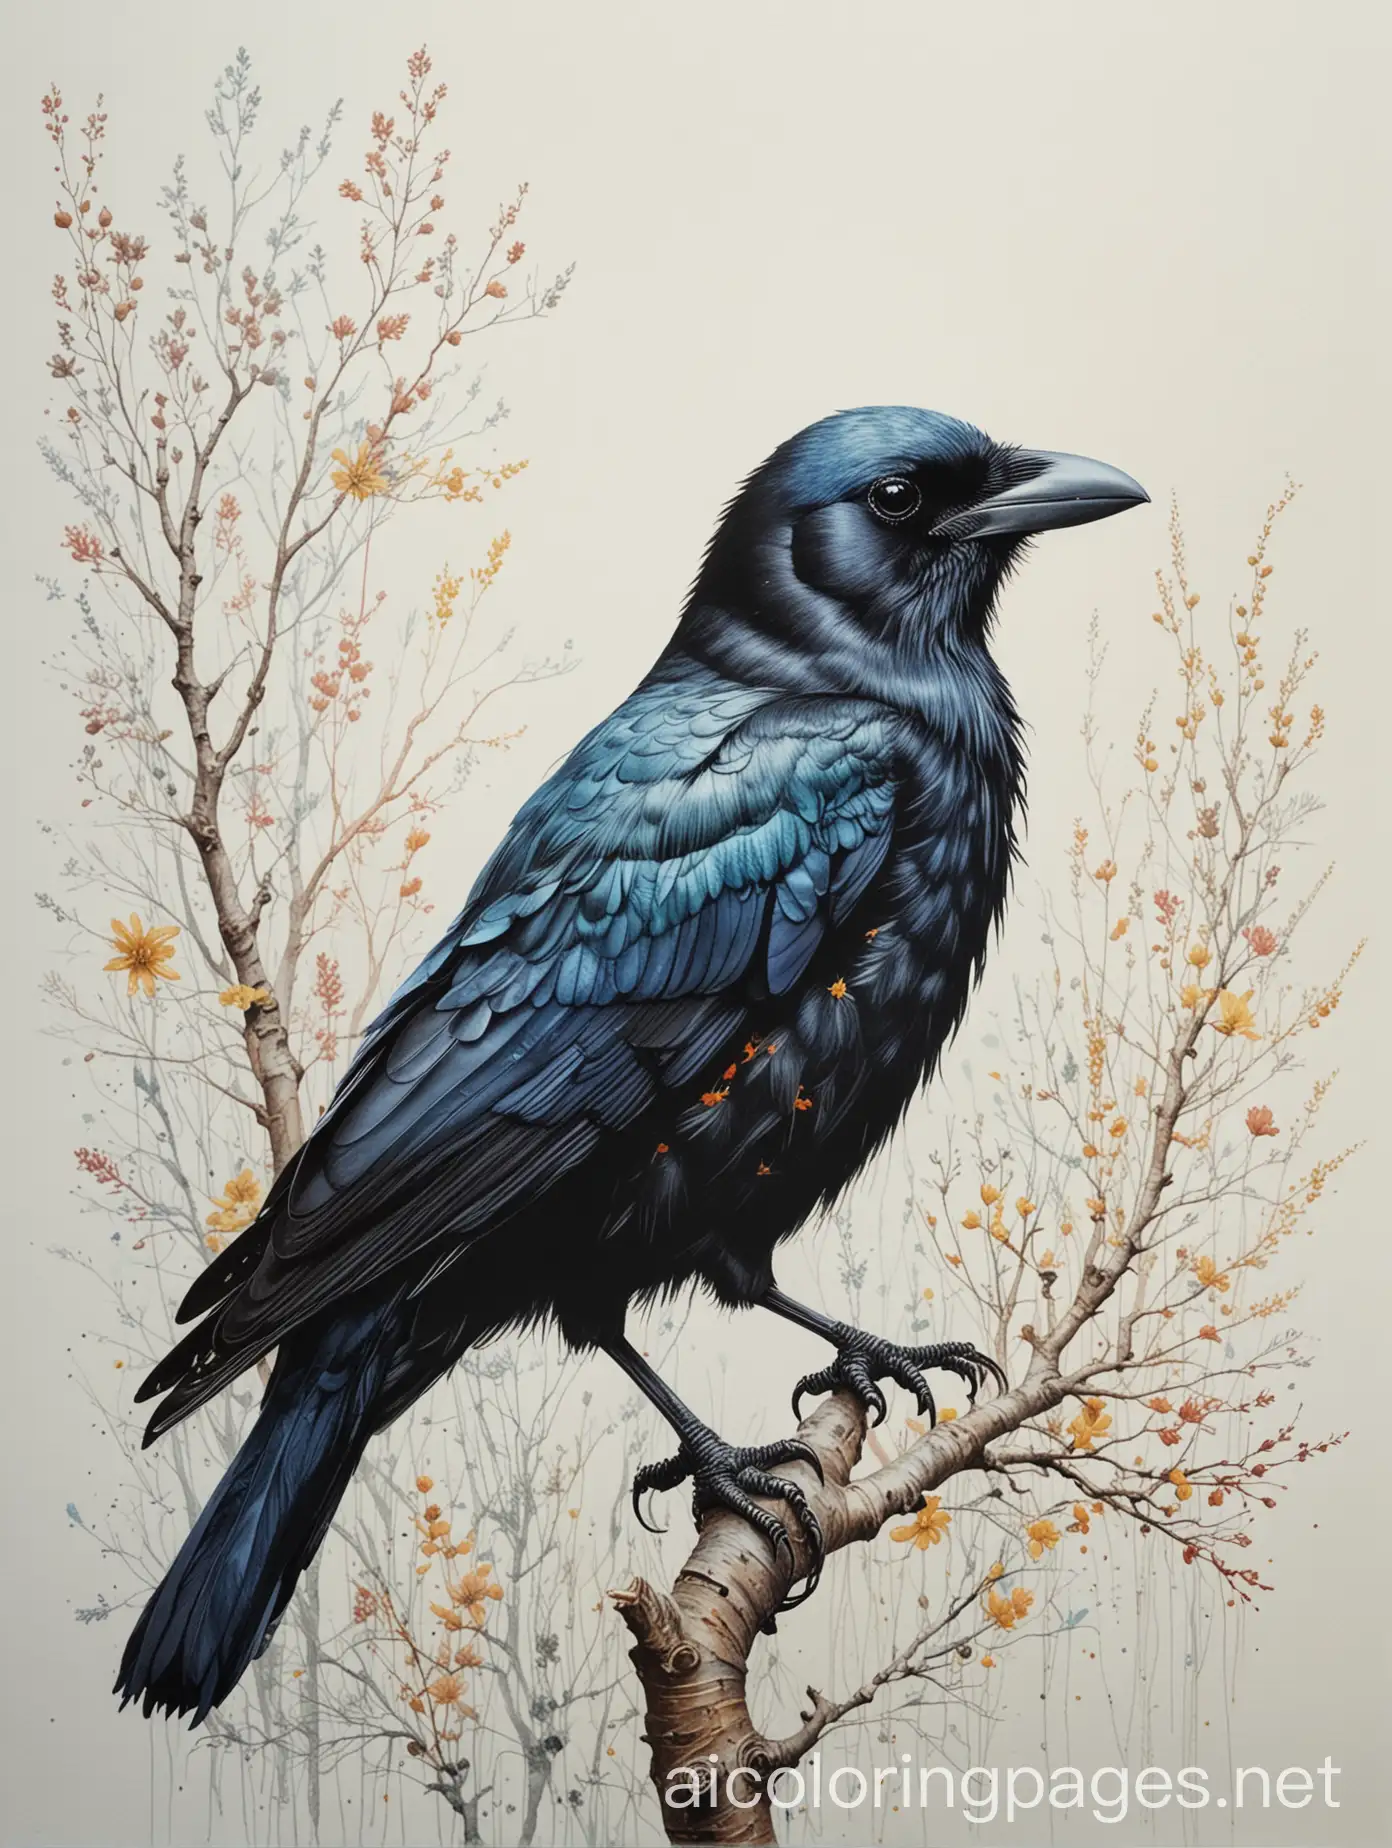 A very pretty crow, art by Lin Fengmian, Anna dittmann, Justin Gaffrey, John Lowrie Morrison, Patty Maher, John Ruskin, Chris Friel, van Gogh, Valerie Hegarty, endre penovac. 3d, soft colors watercolors and ink, beautiful, fantastic view, extremely detailed, intricate, best quality, highest definition, rich colours., Coloring Page, black and white, line art, white background, Simplicity, Ample White Space. The background of the coloring page is plain white to make it easy for young children to color within the lines. The outlines of all the subjects are easy to distinguish, making it simple for kids to color without too much difficulty